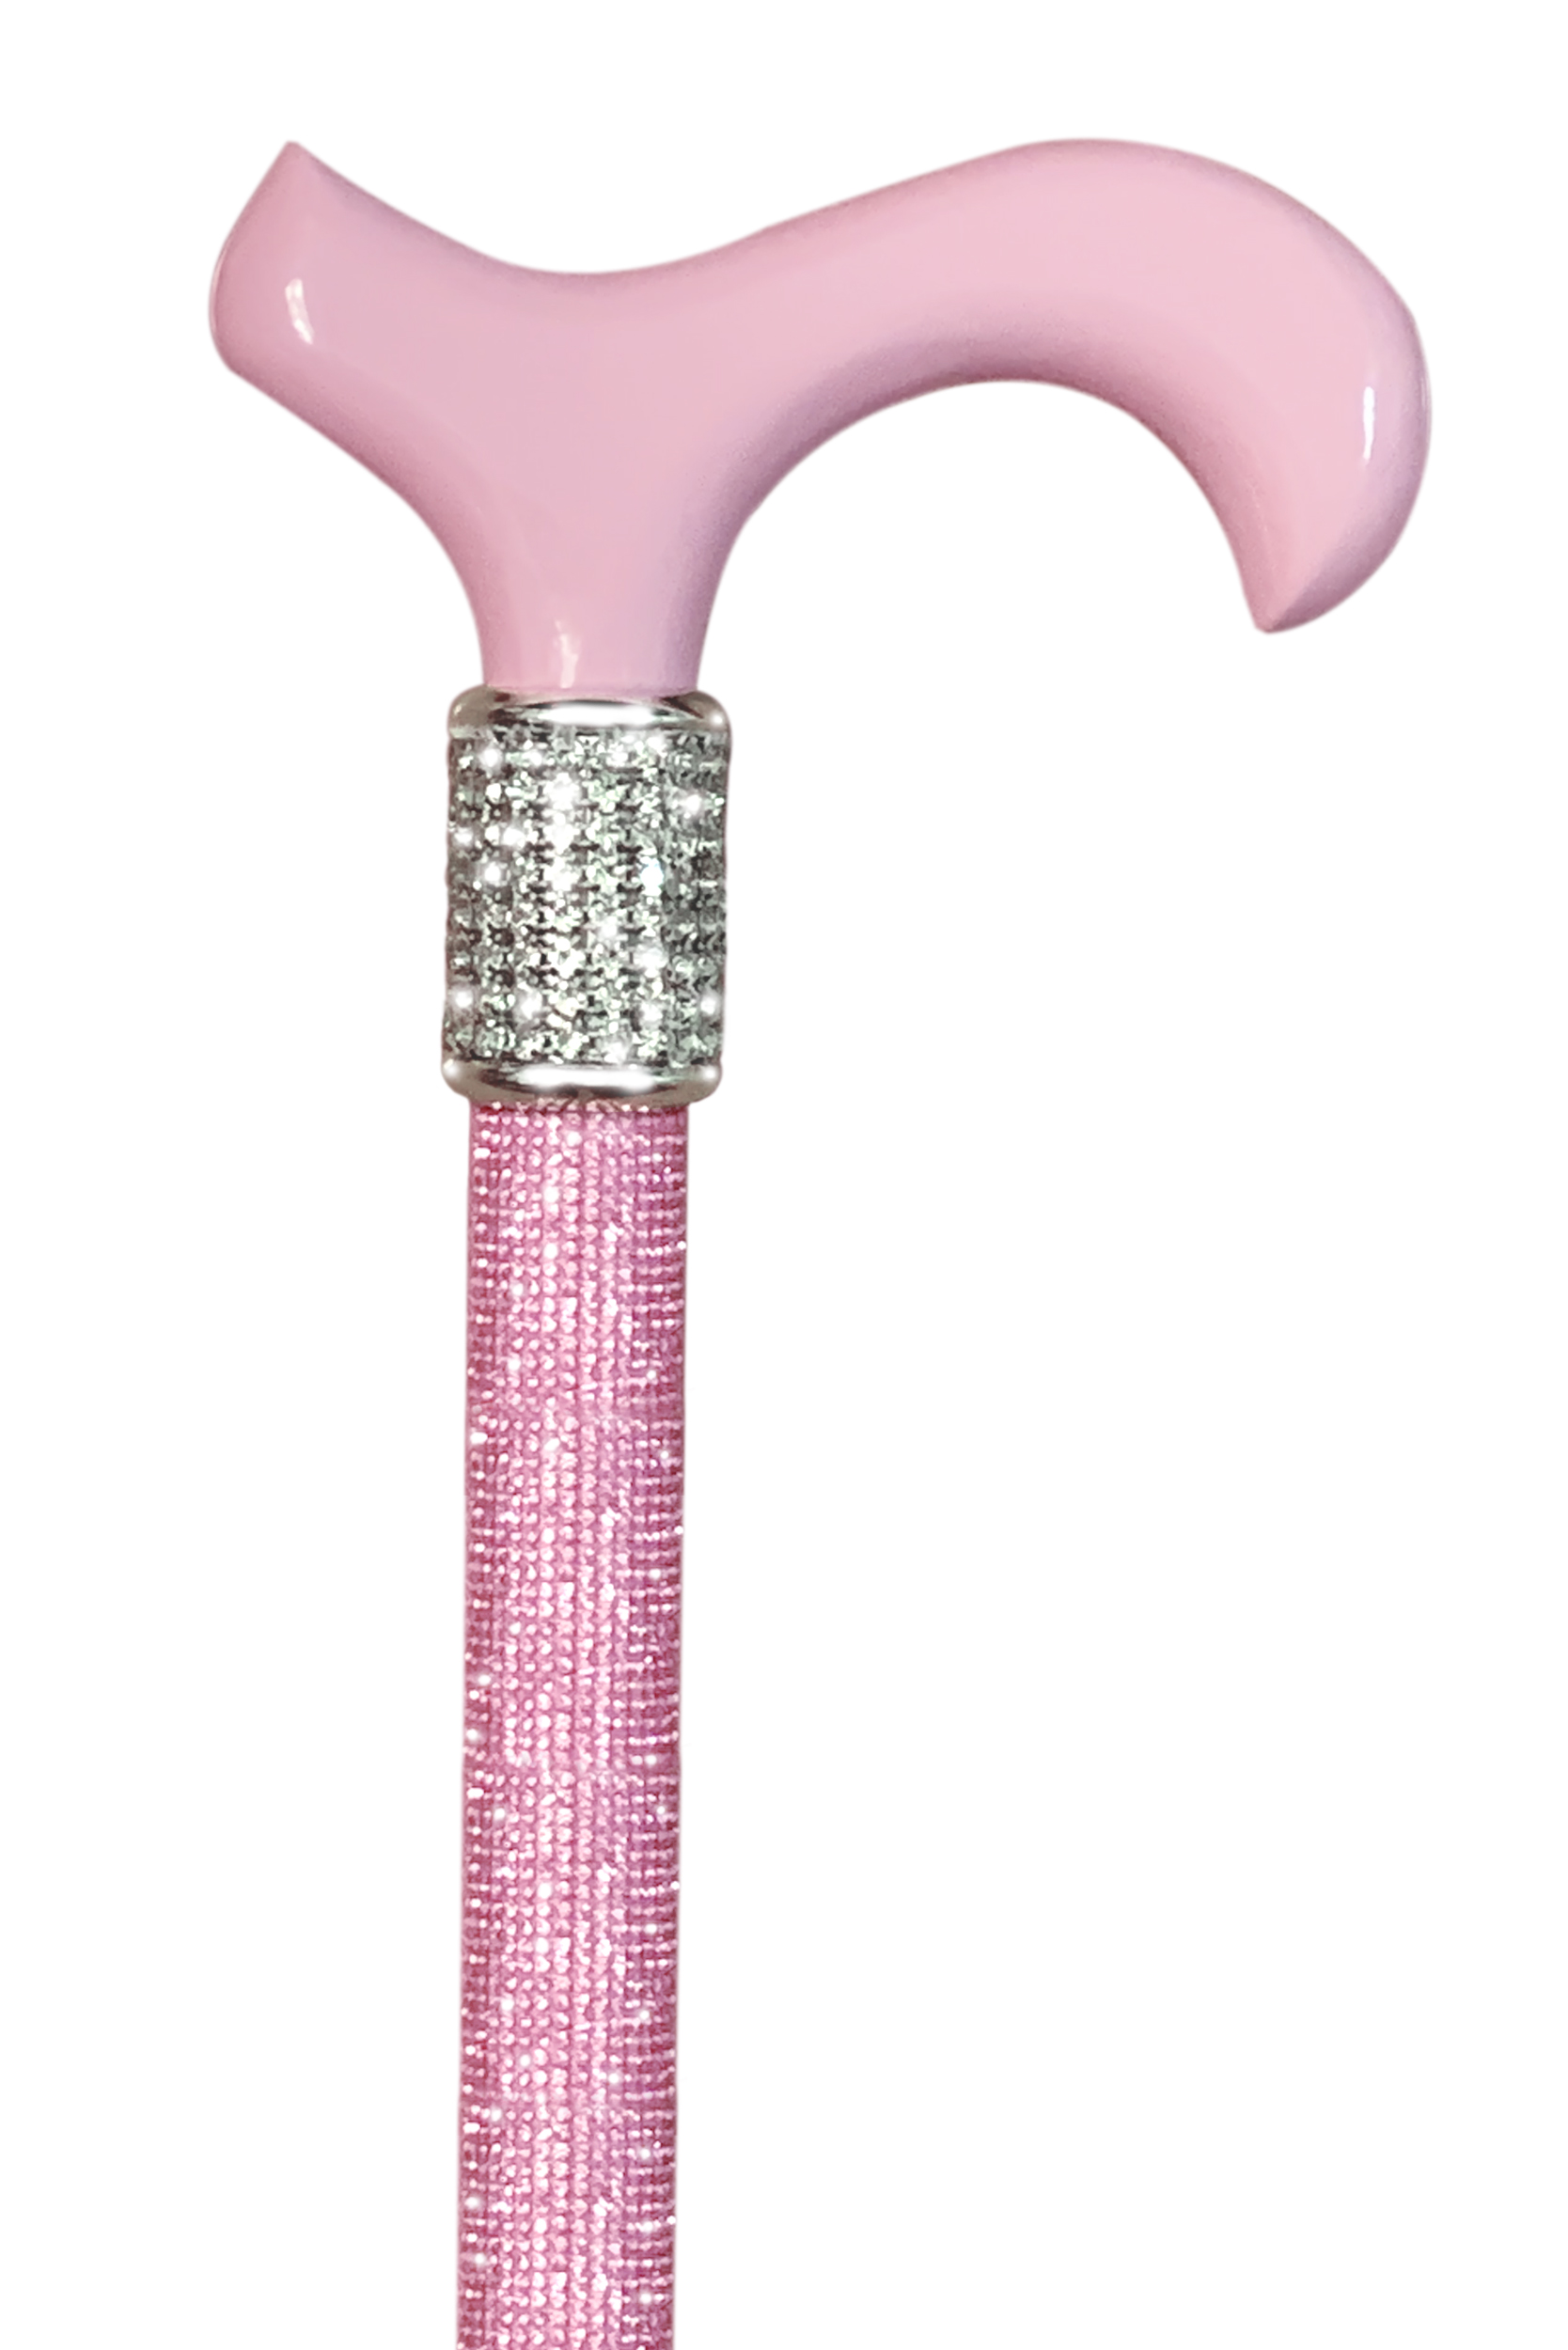  OrthoGlam Sparkling Champagne Lightweight Crystal Rhinestone  Bedazzled Fashion Cane - Fashionable Rhinestone Bling Wooden Walking Stick  for Balance Assistance (Small) : Health & Household